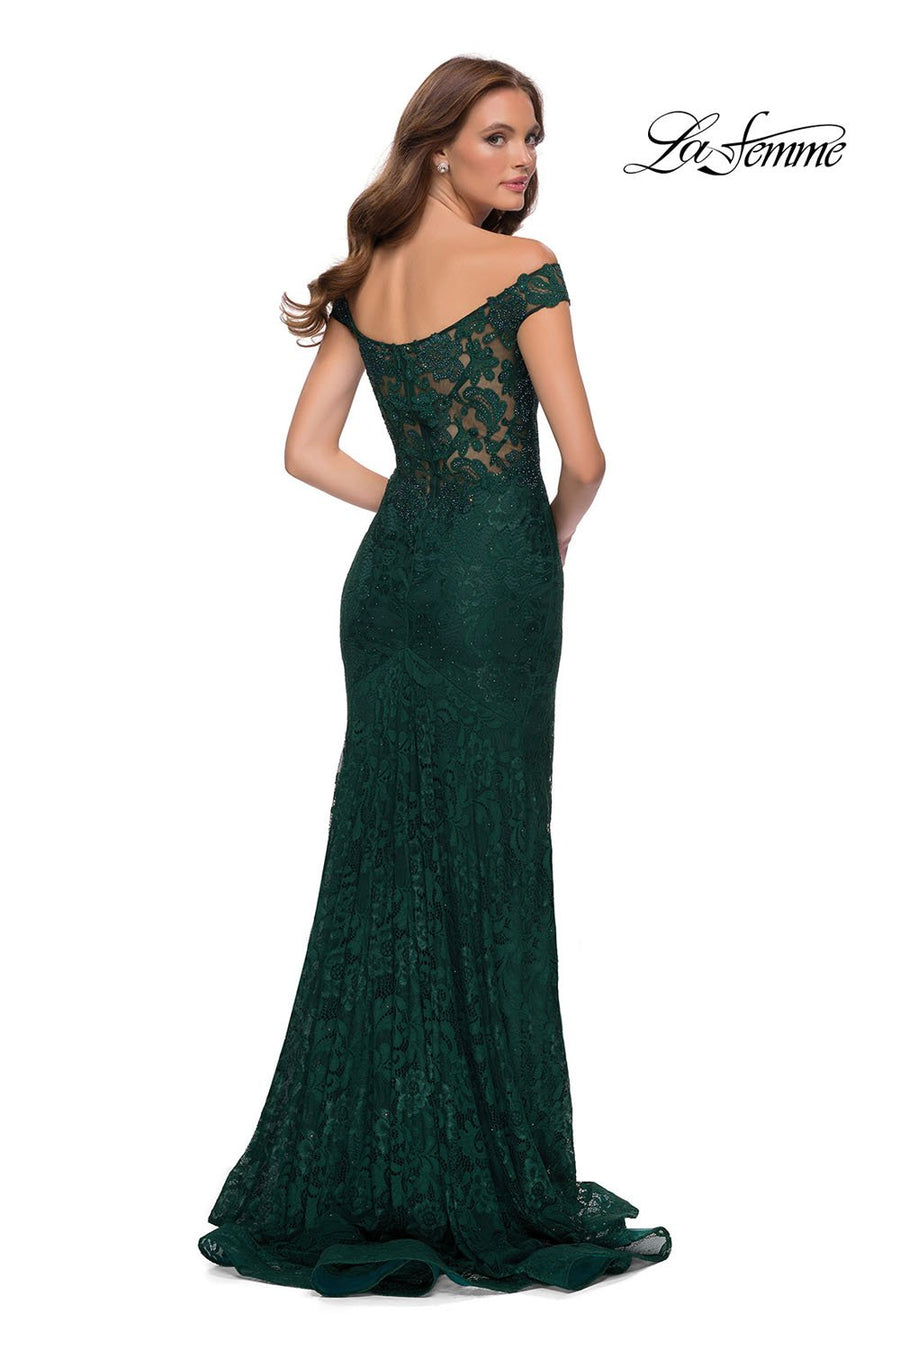 La Femme 29693 prom dress images.  La Femme 29693 is available in these colors: Black, Dark Berry, Emerald.